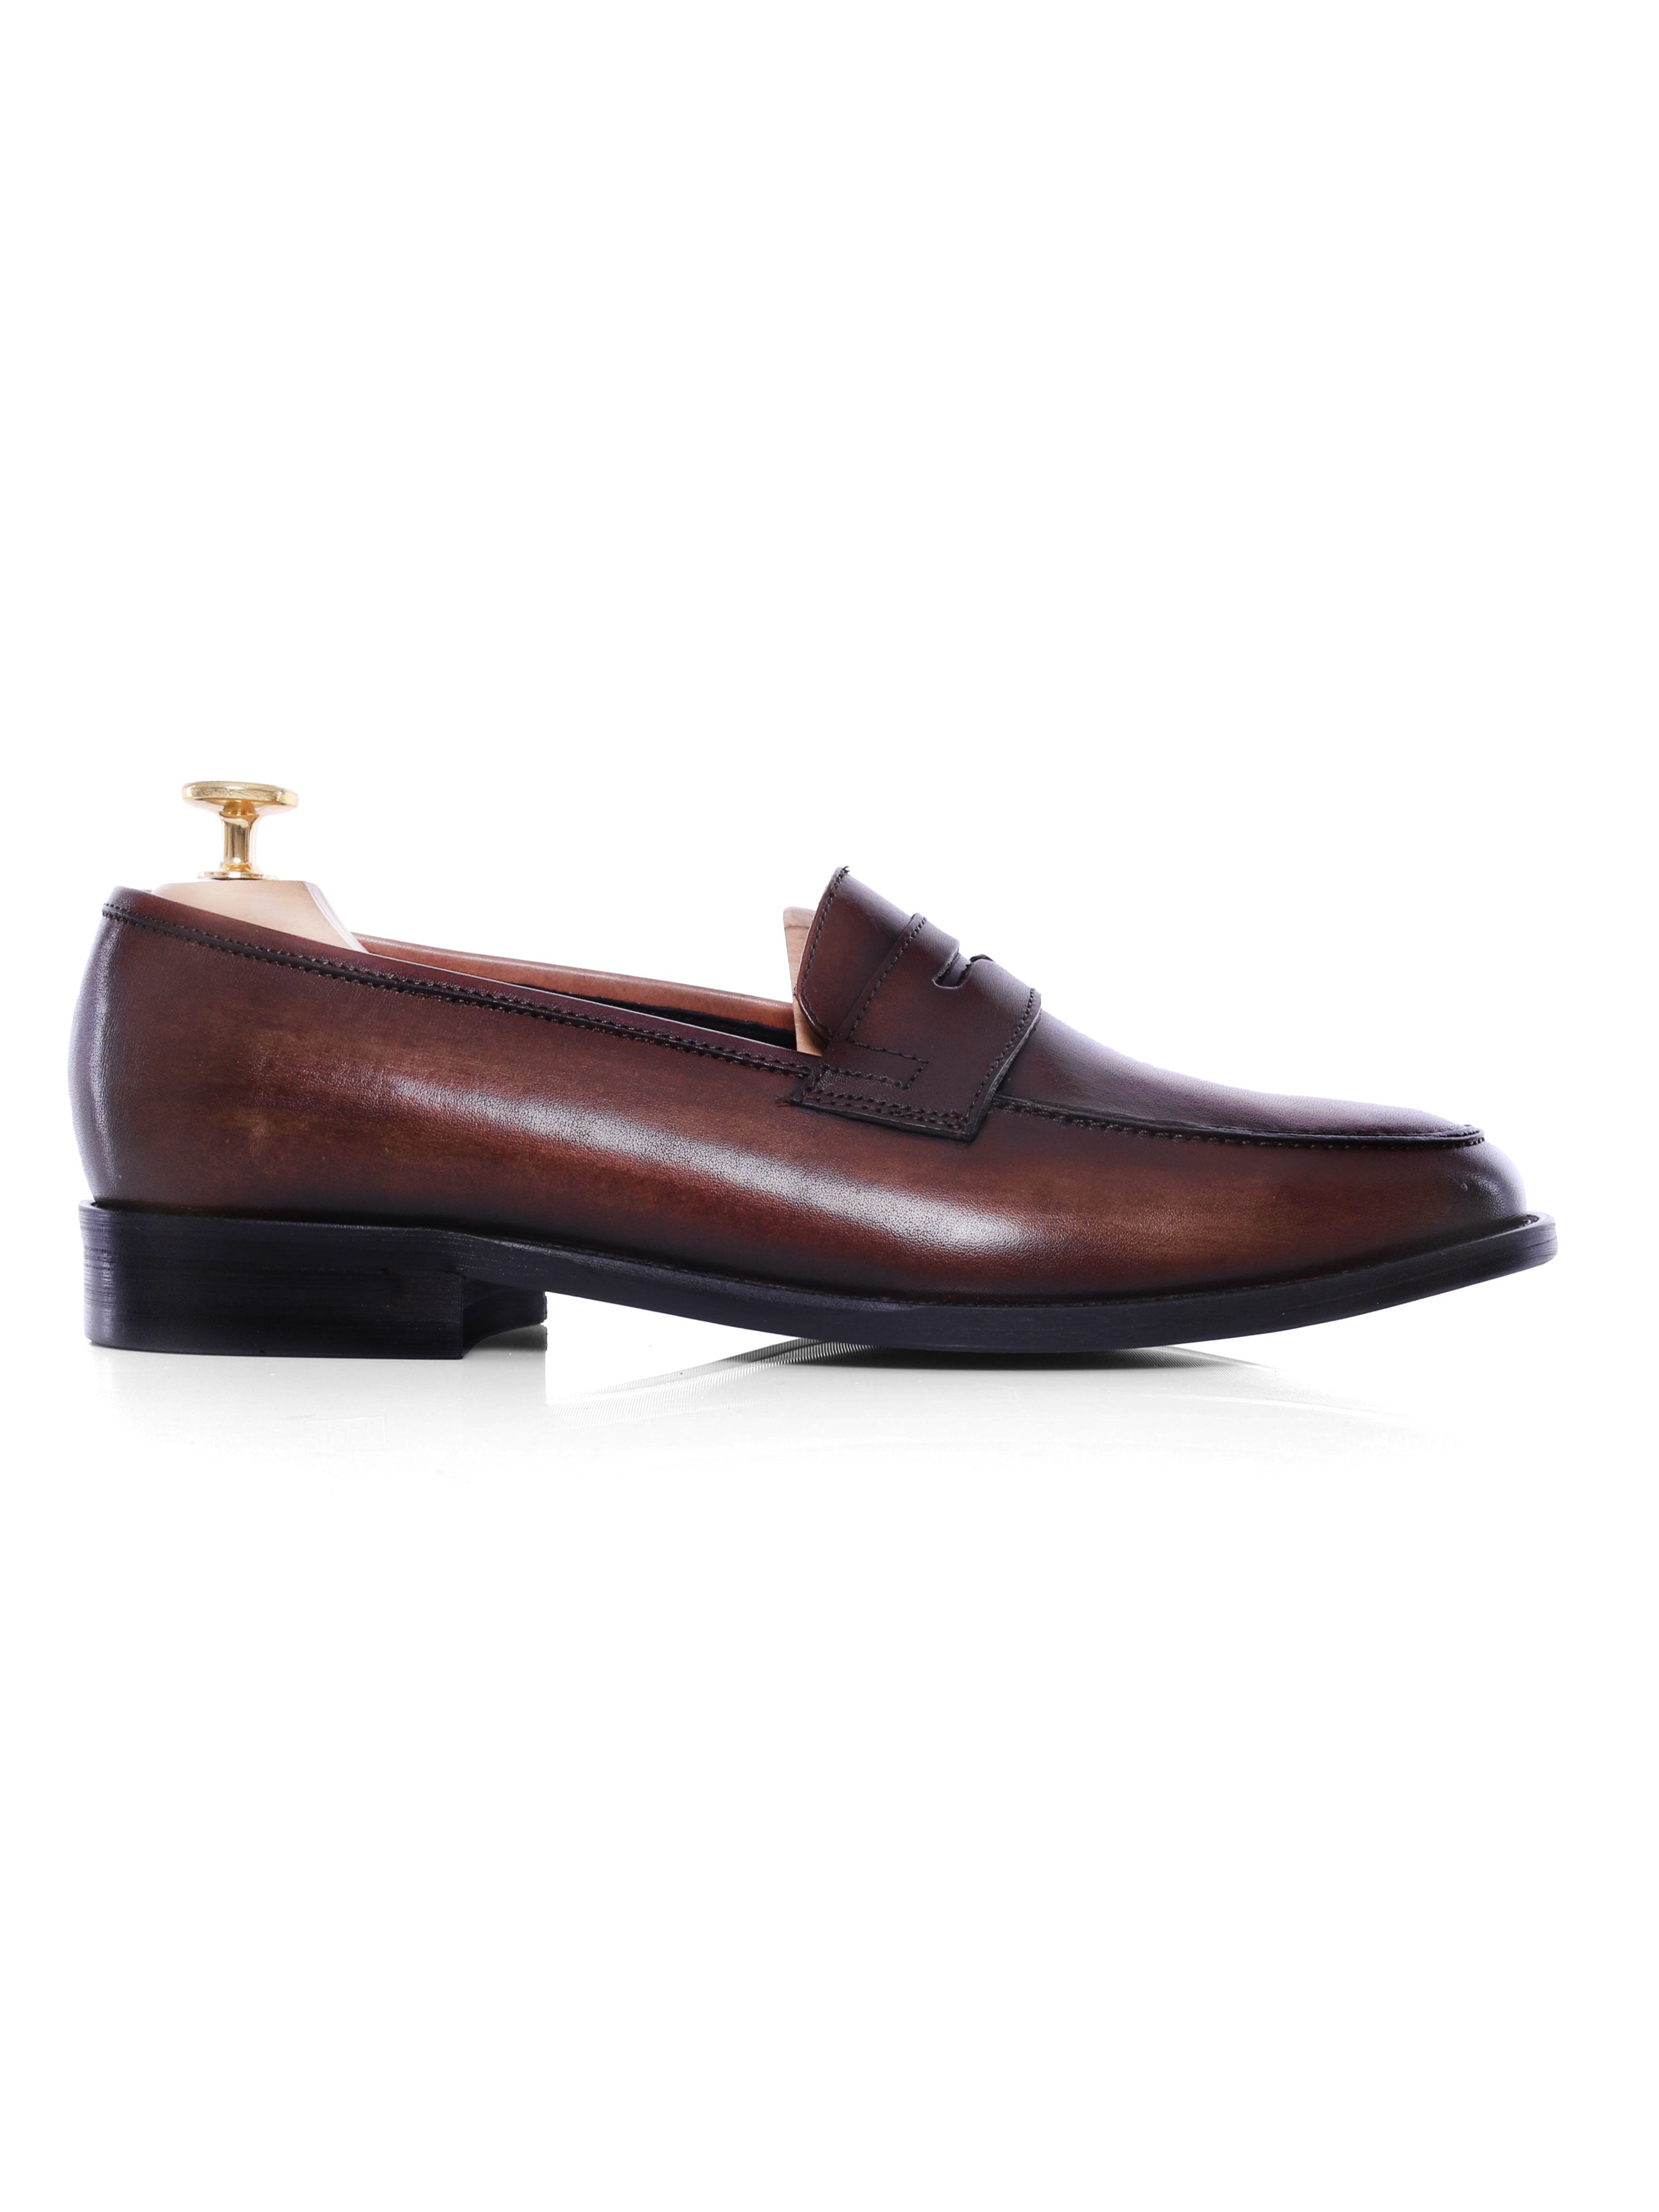 Penny Loafer - Dark Brown (Hand Painted Patina) - Zeve Shoes